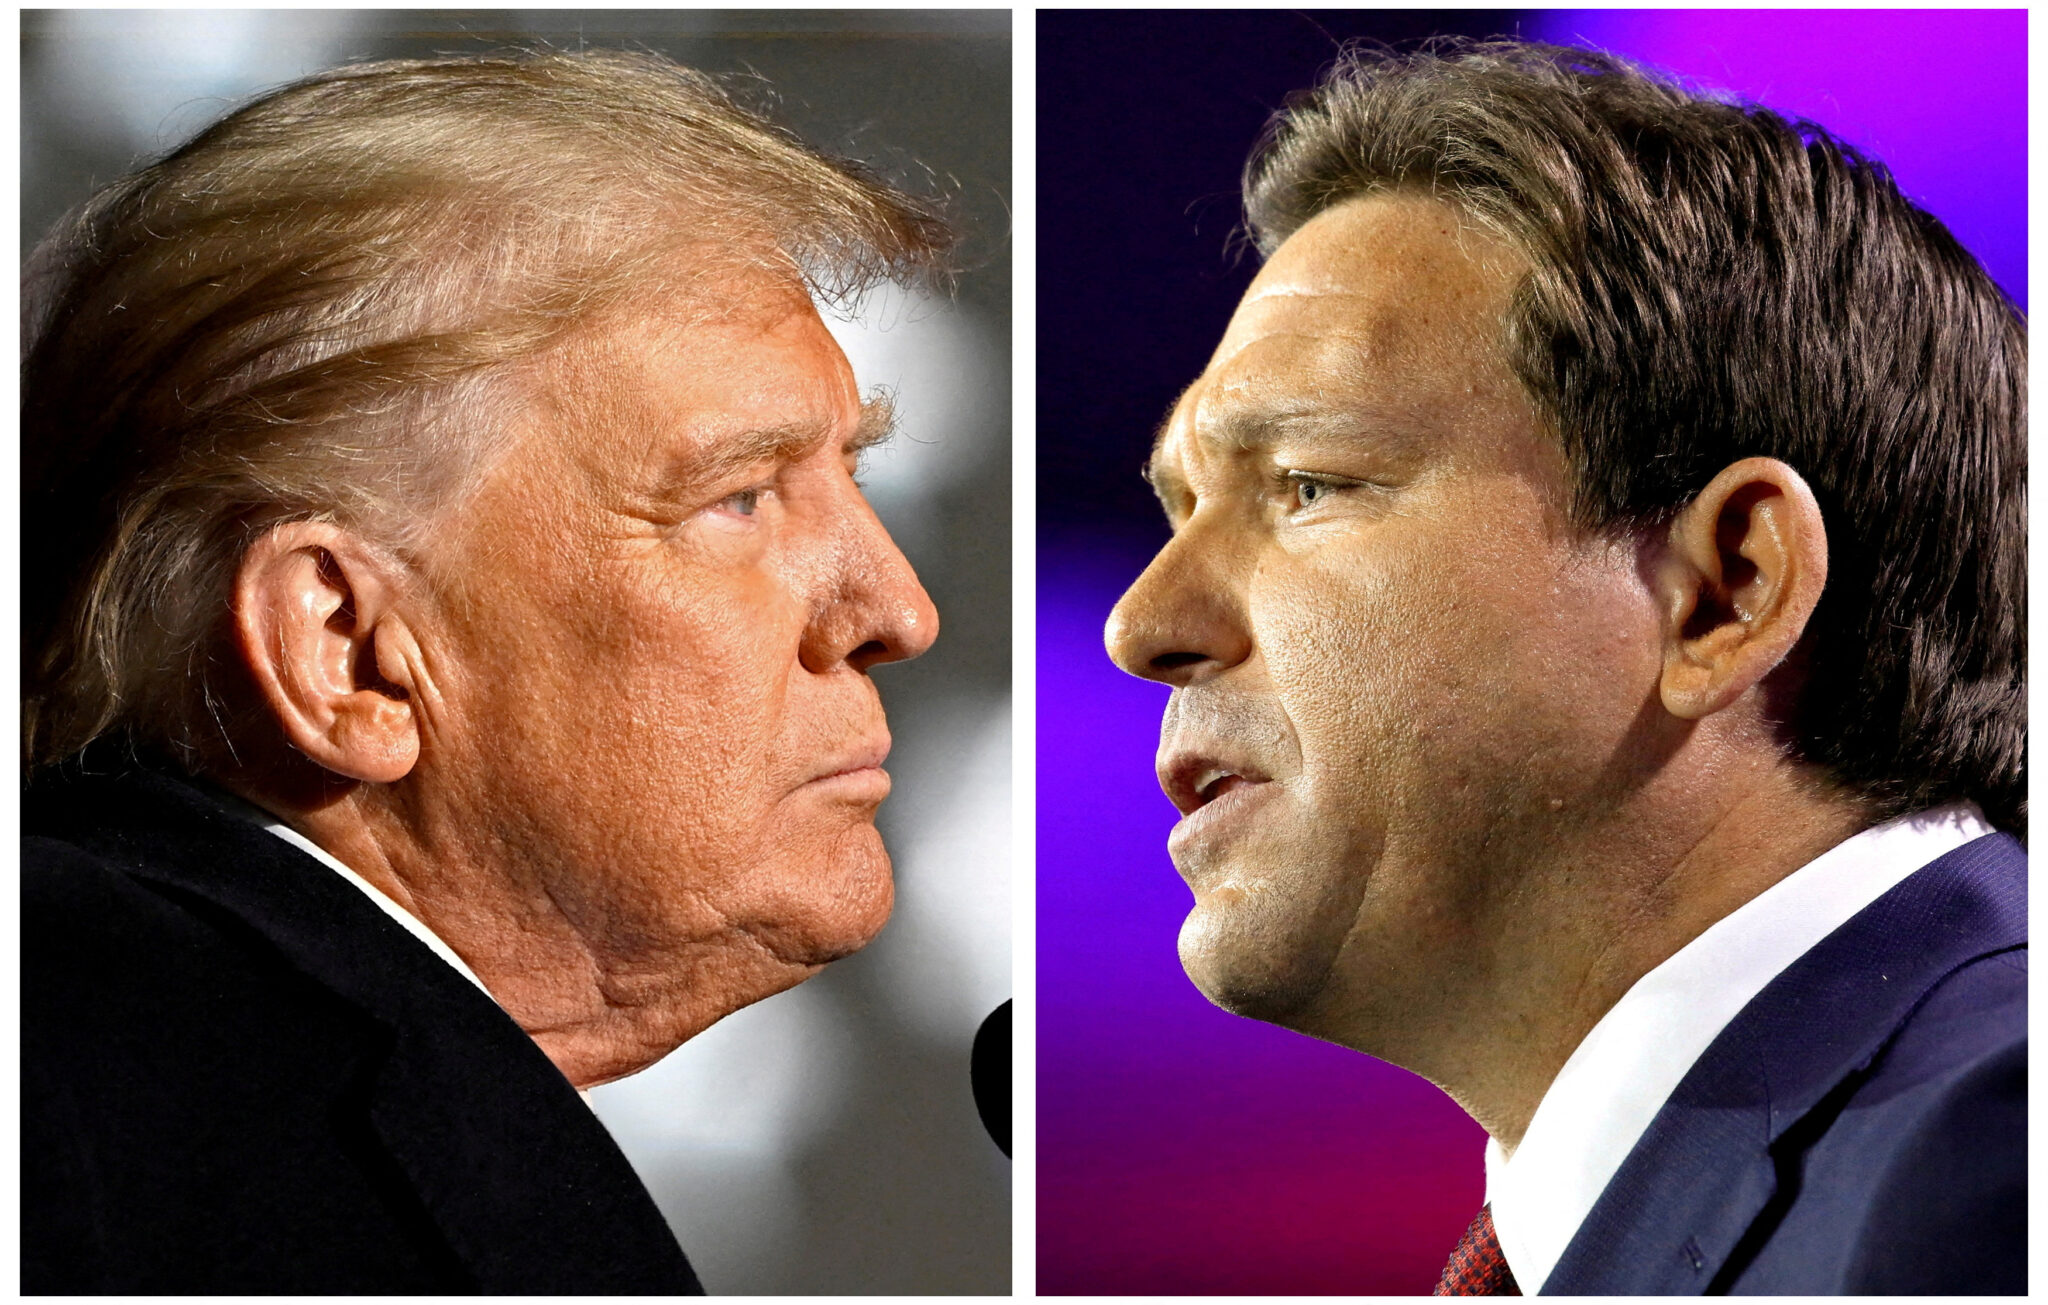 Trump wades into education culture war as he eyes race with DeSantis